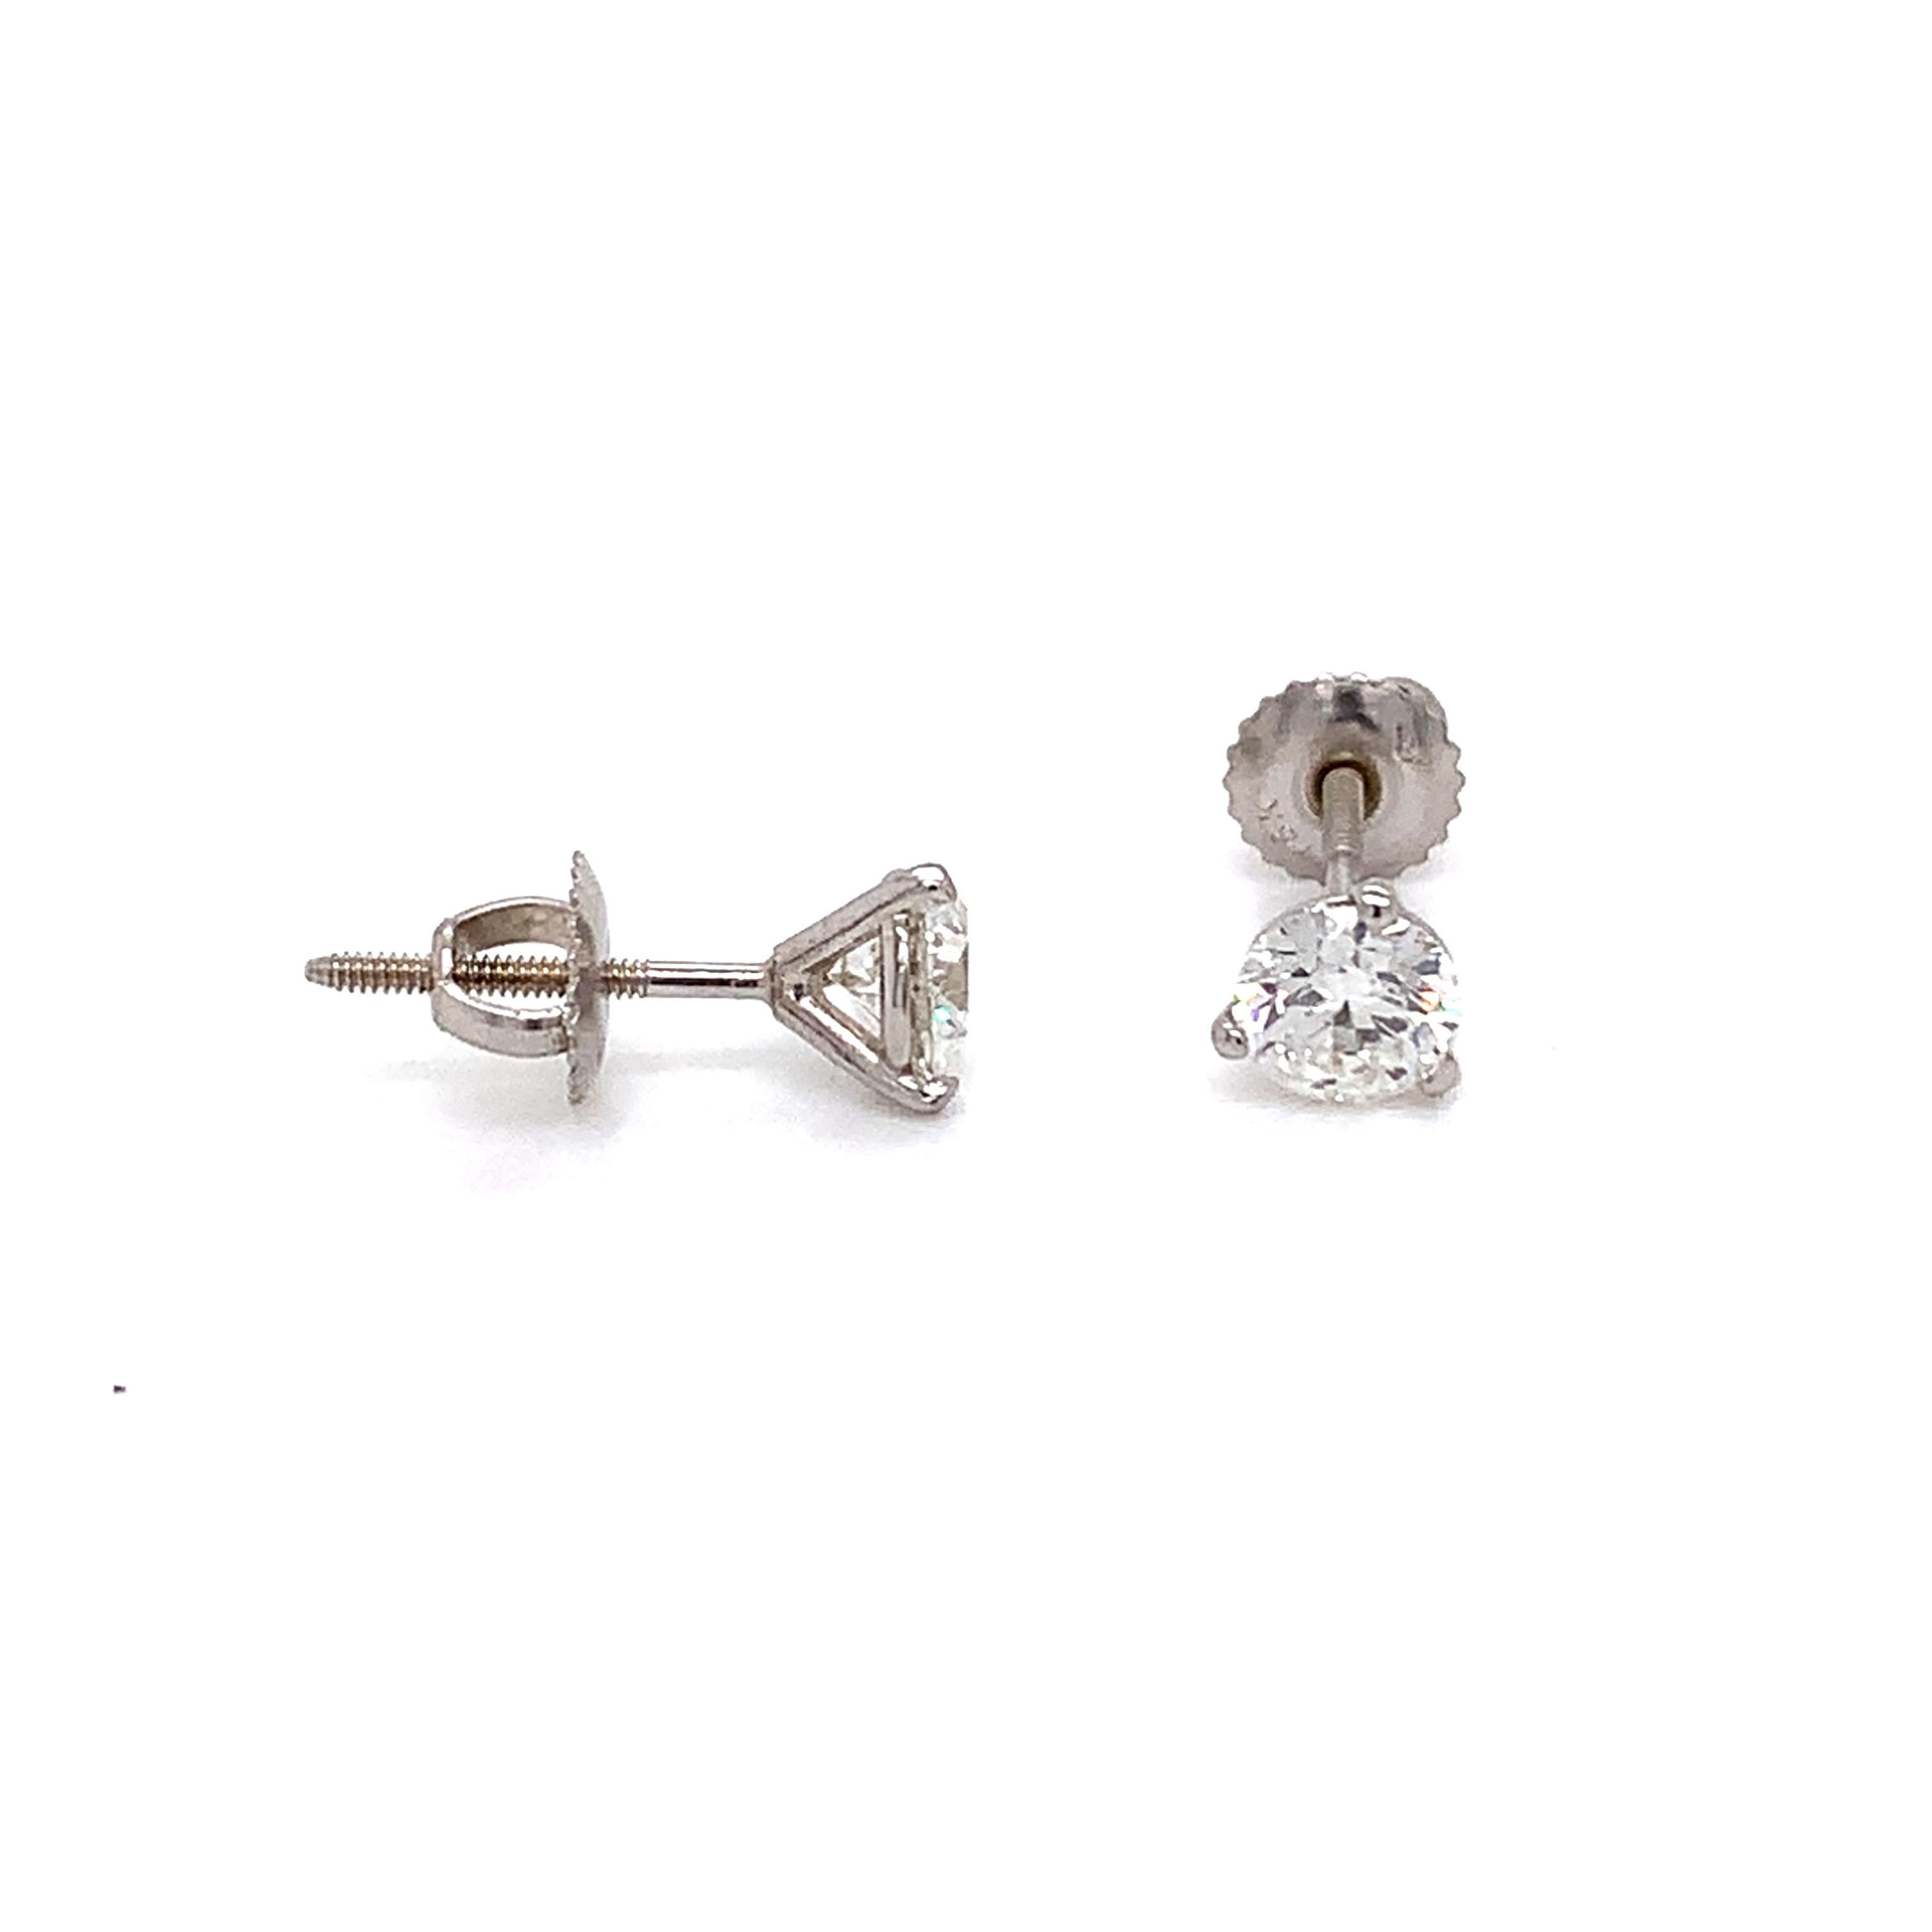 Diamond stud earrings made with real/natural brilliant cut diamonds. Total Diamond Weight: 1.19 carats. Diamond Quantity: 2 round diamonds. Color: H-I Clarity: SI1-SI2 Mounted on 18 karat white gold screw back setting.